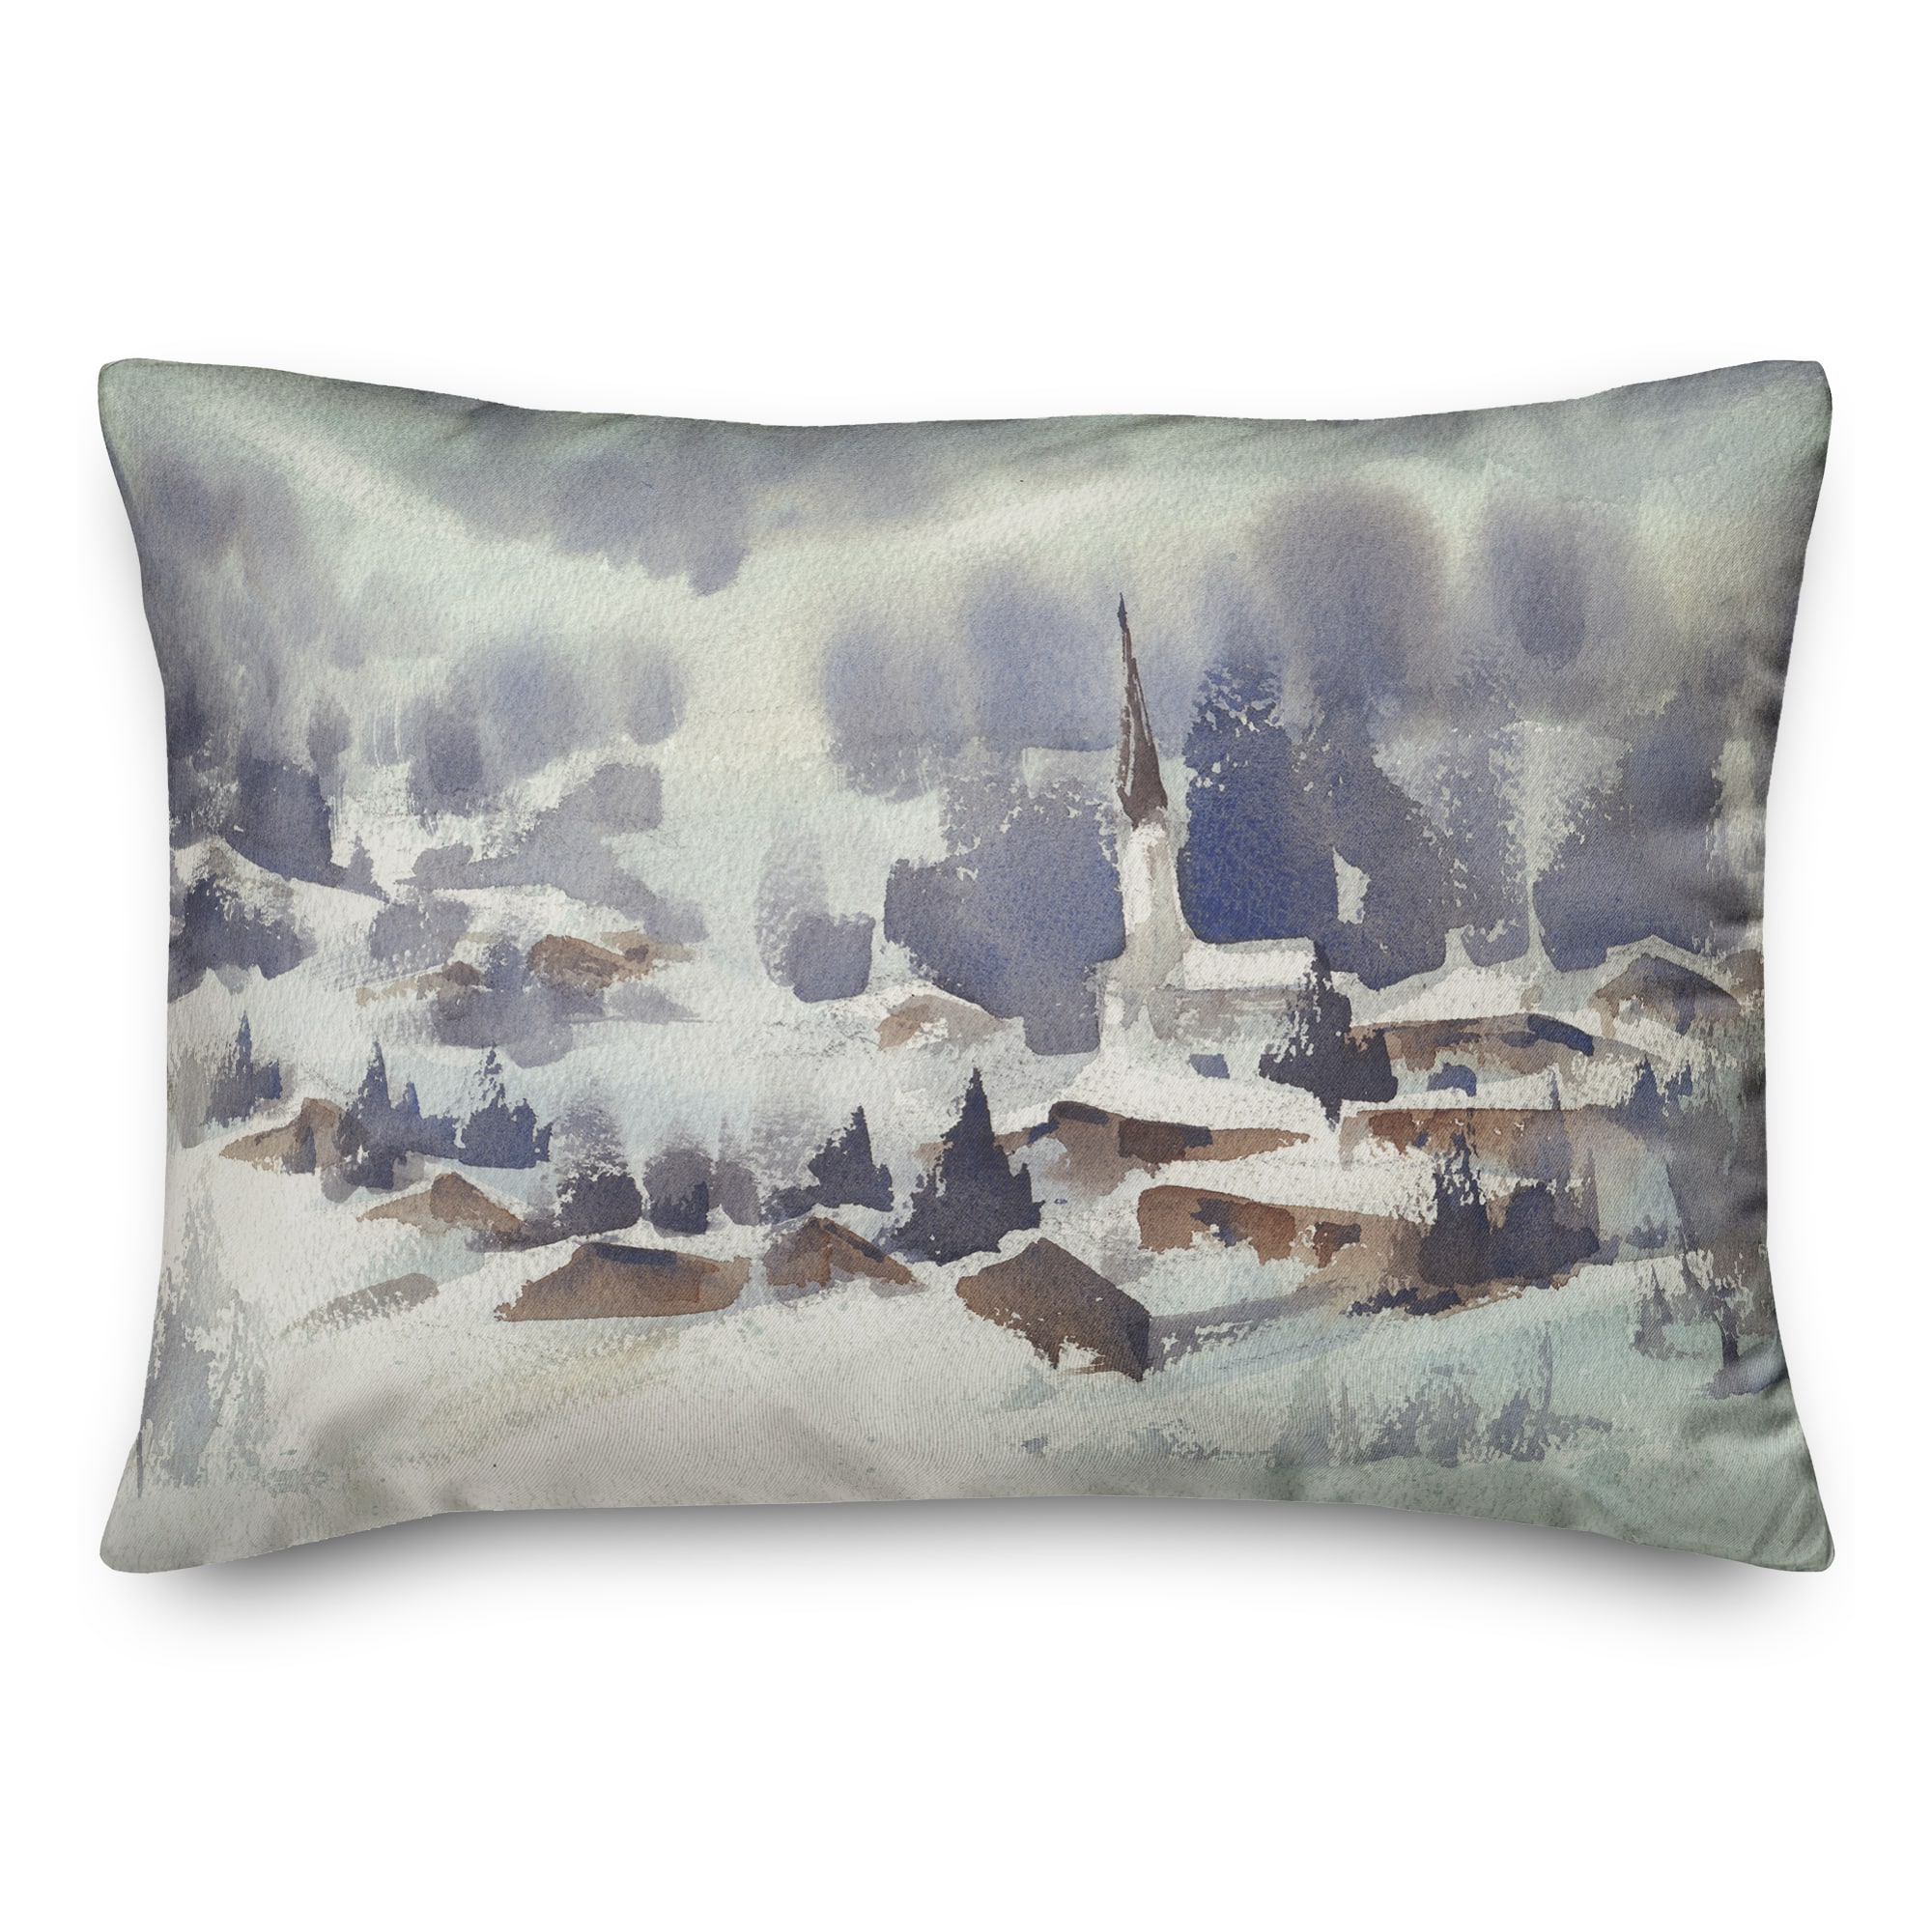 Winter Abstract Landscape Throw Pillow